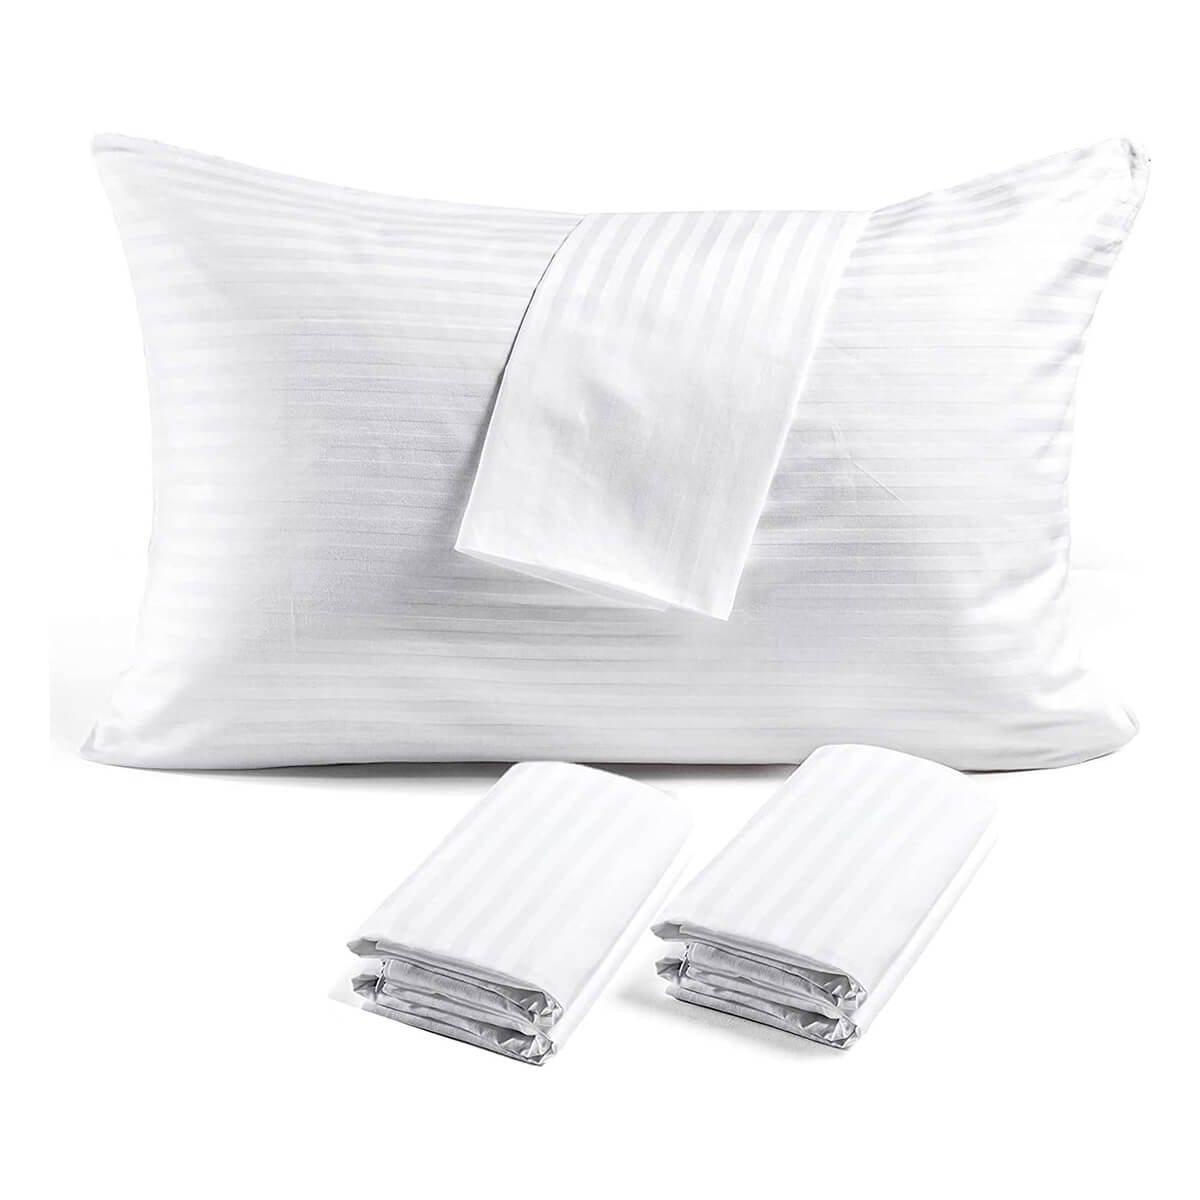 Strip Pillow Protectors Pack of 4